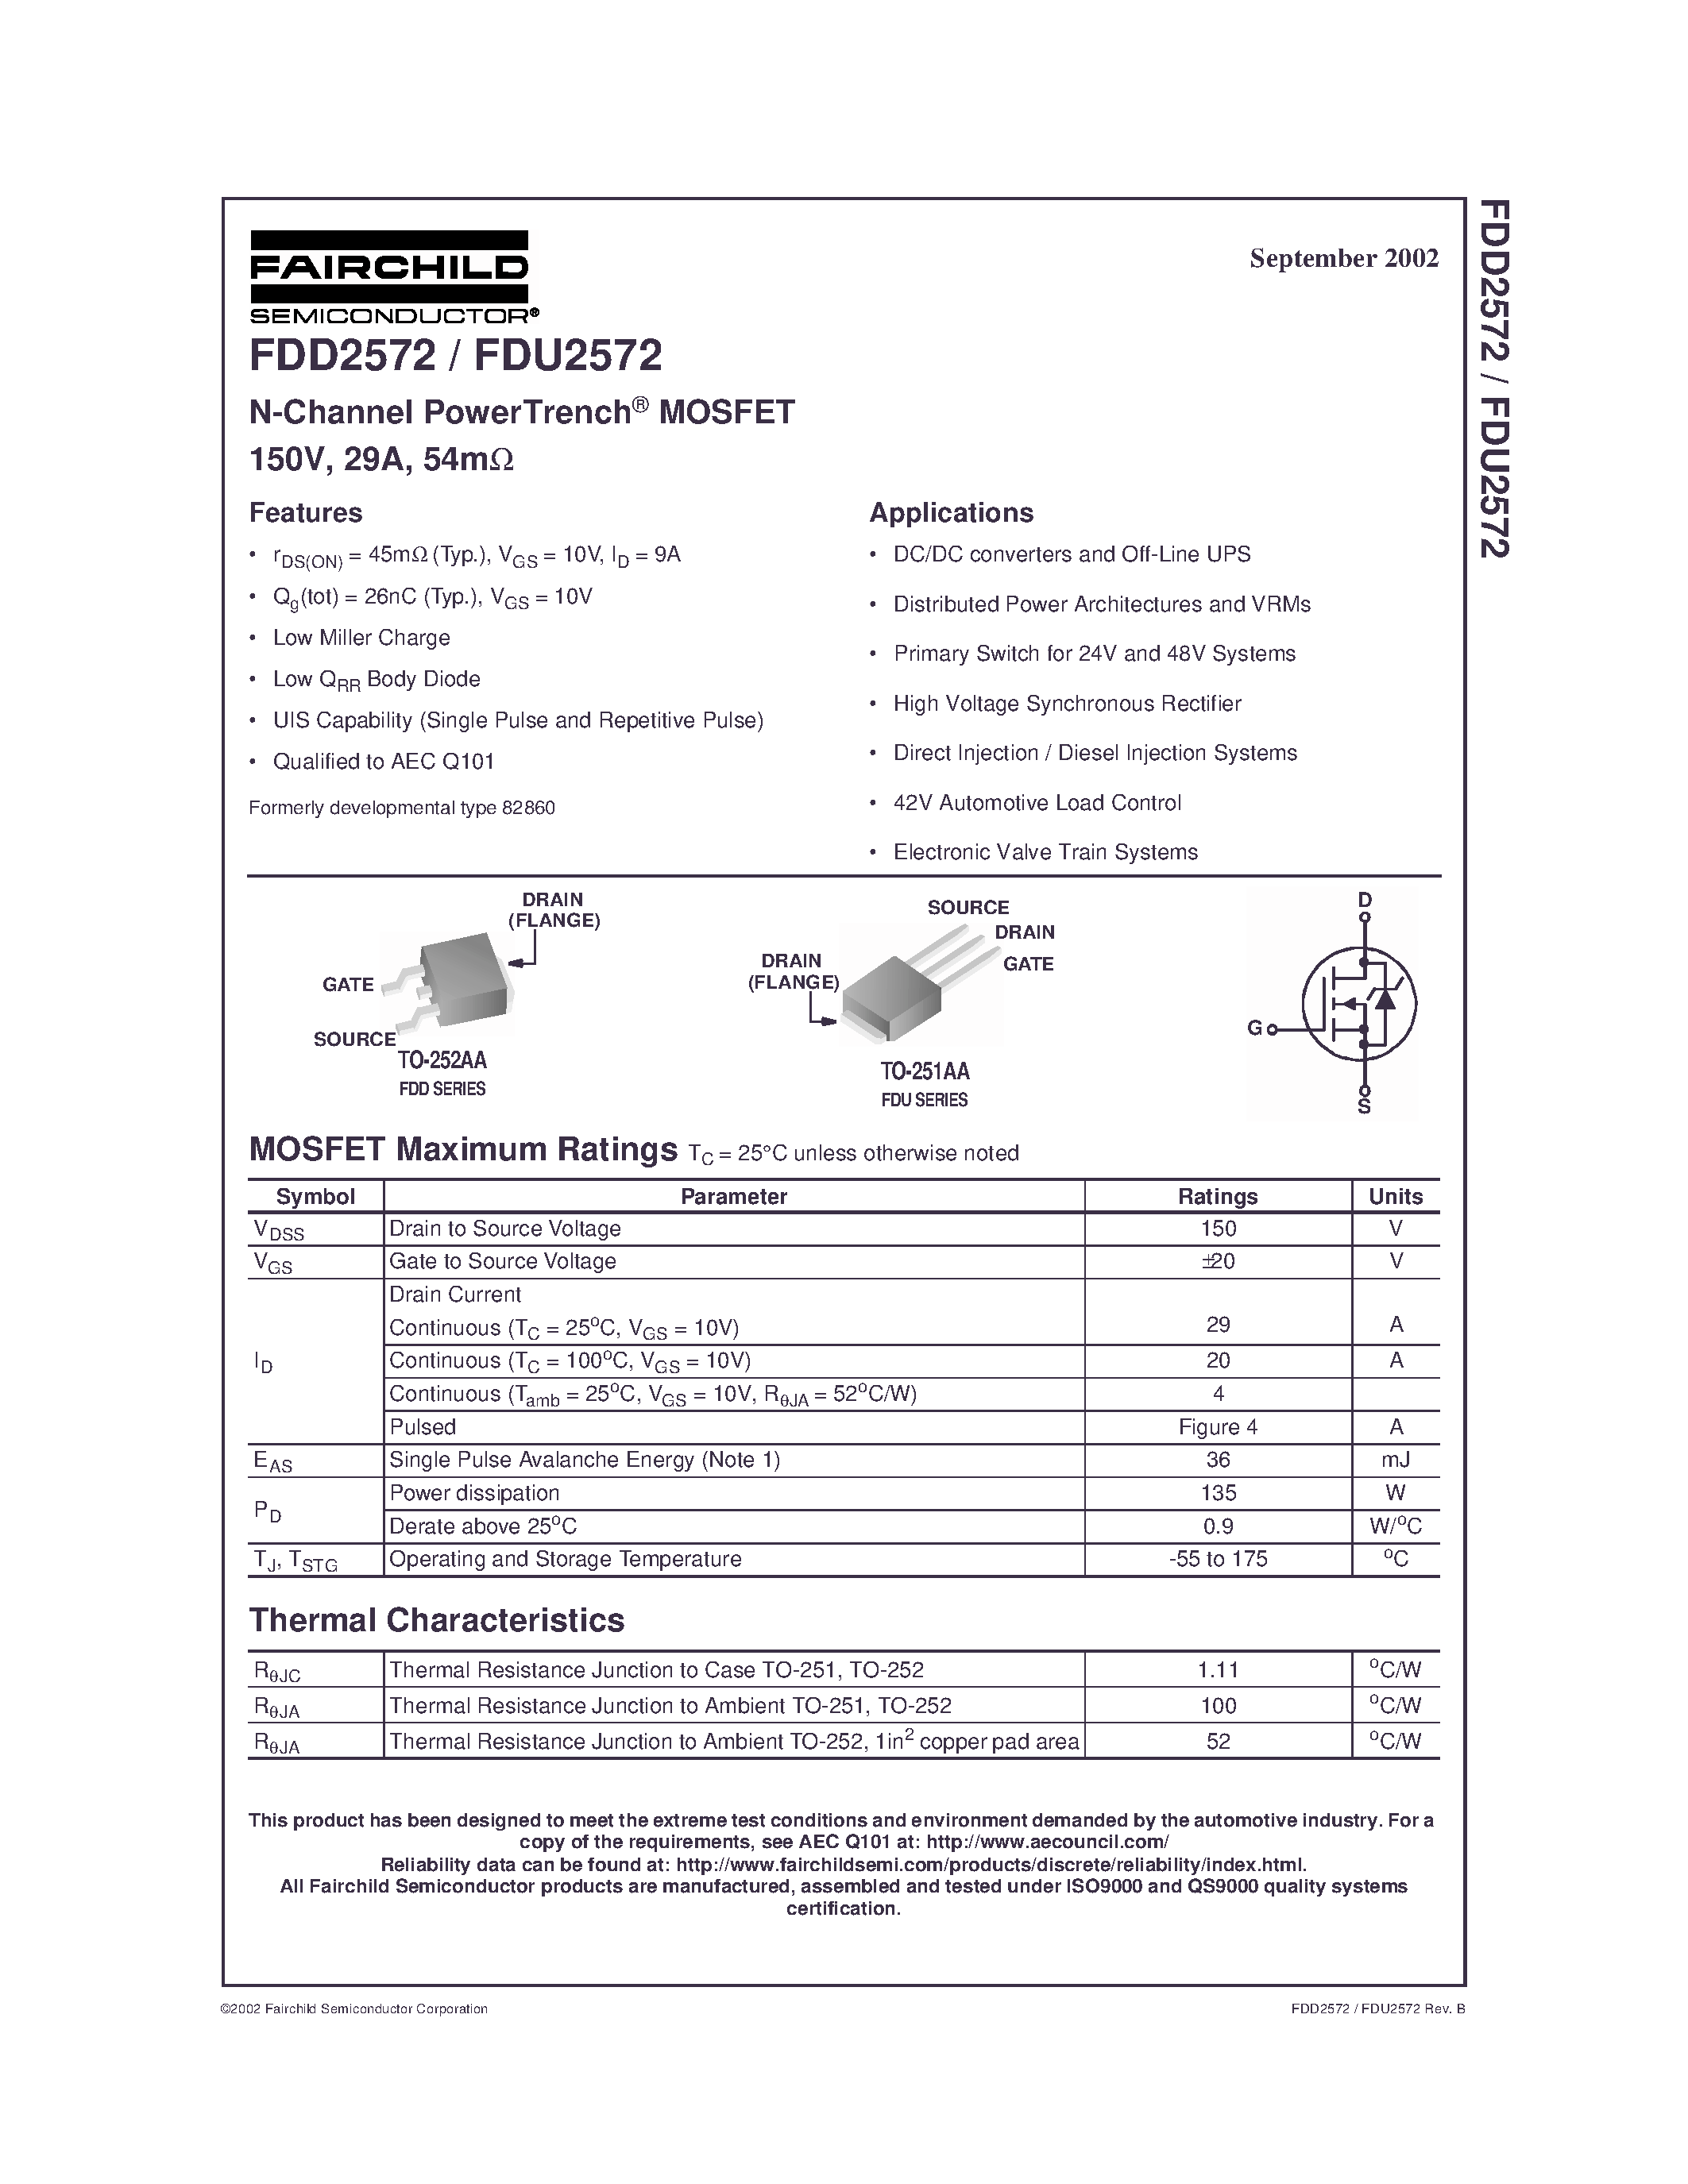 Даташит FDD2572 - N-Channel PowerTrench MOSFET 150V/ 29A/ 54m страница 1